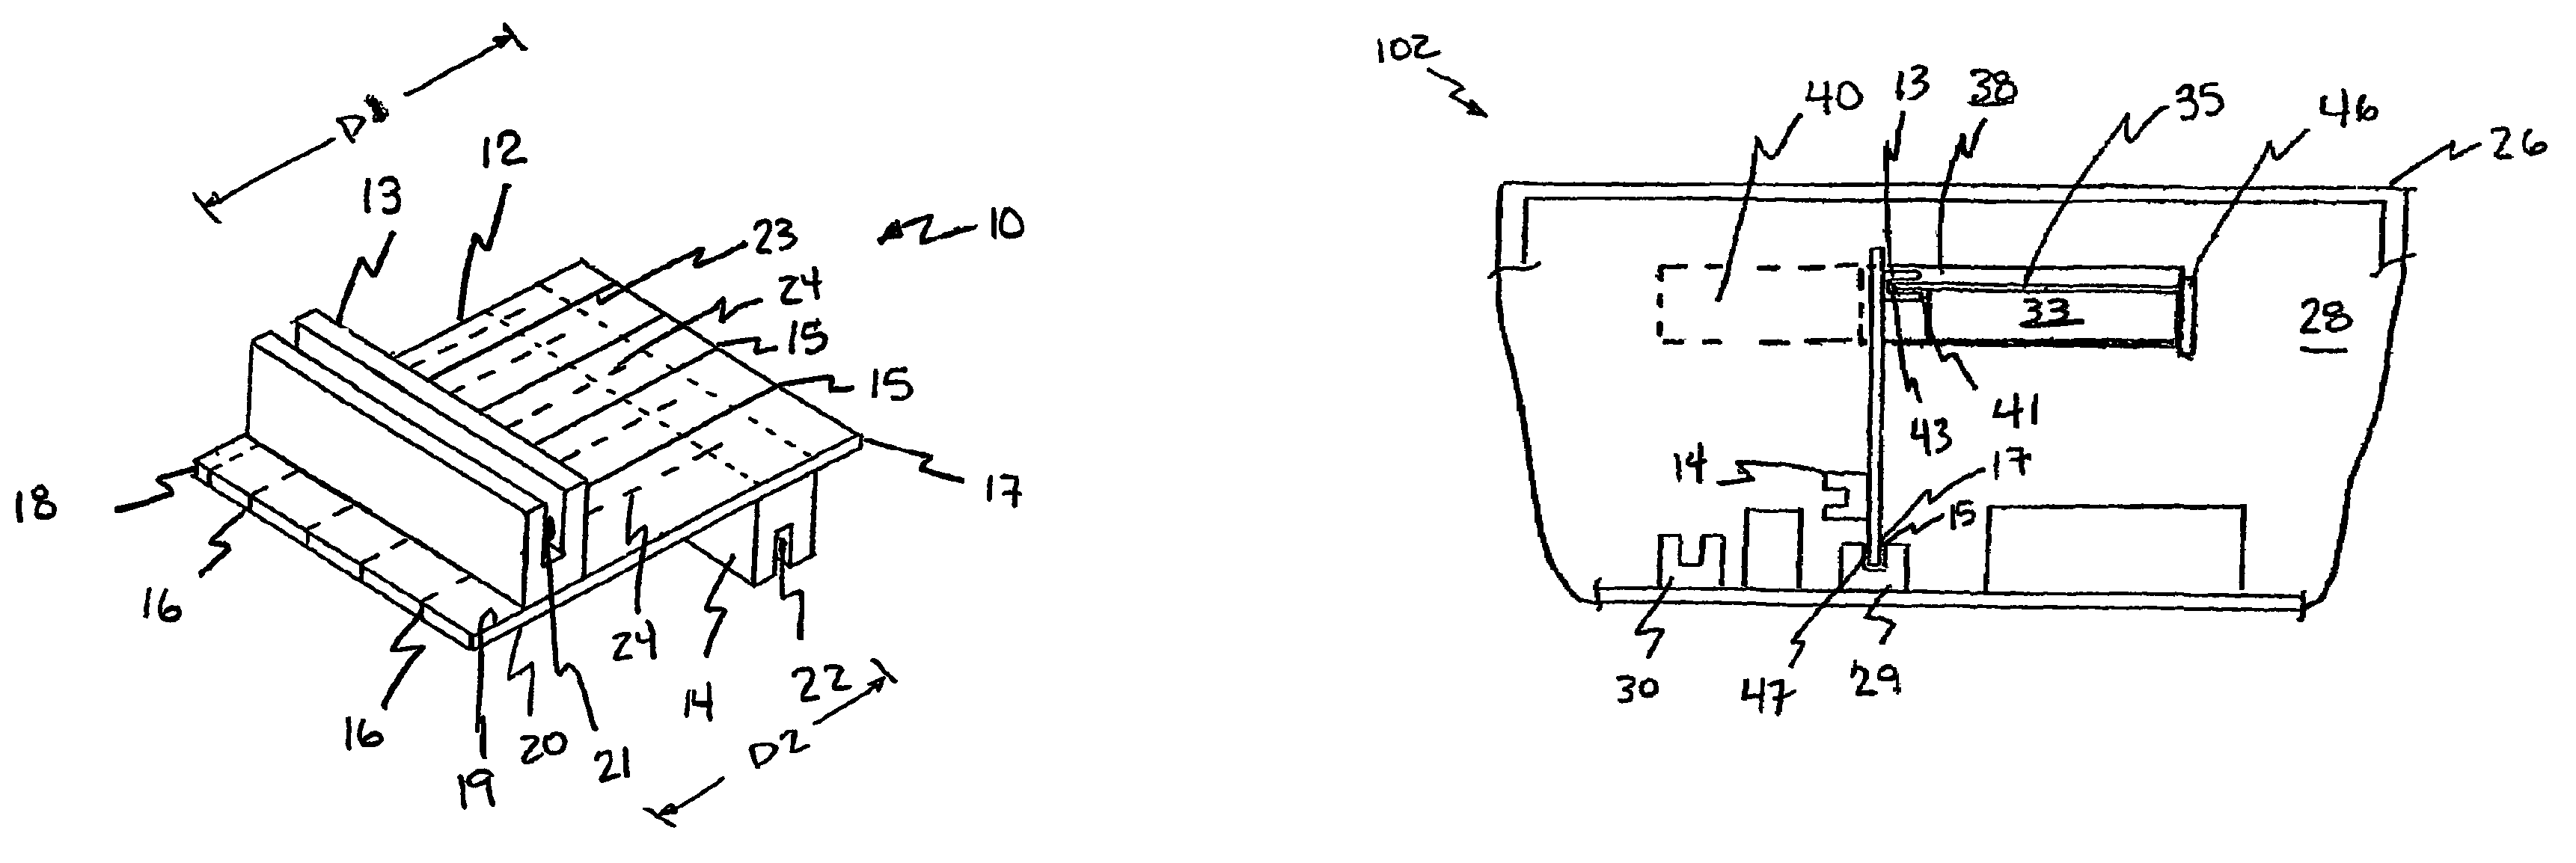 Circuit board riser for volume sharing peripheral cards